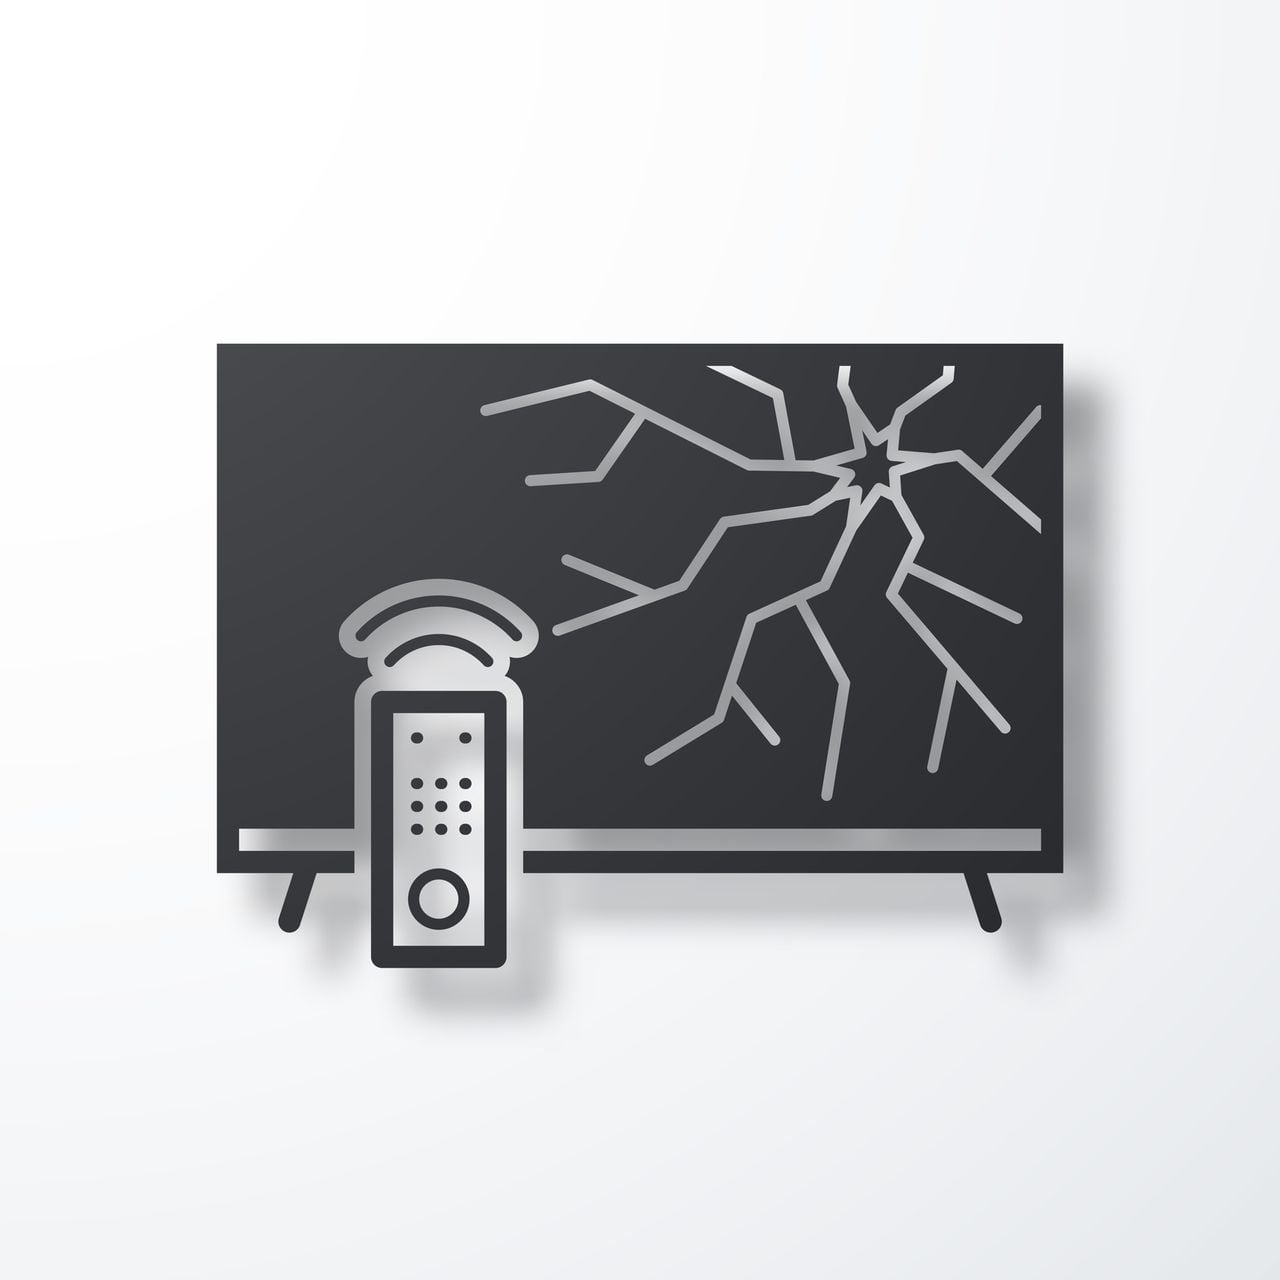 Black icon of "TV with broken screen" with a shadow isolated on a blank background. Vector Illustration (EPS file, well layered and grouped). Easy to edit, manipulate, resize or colorize. Vector and Jpeg file of different sizes.